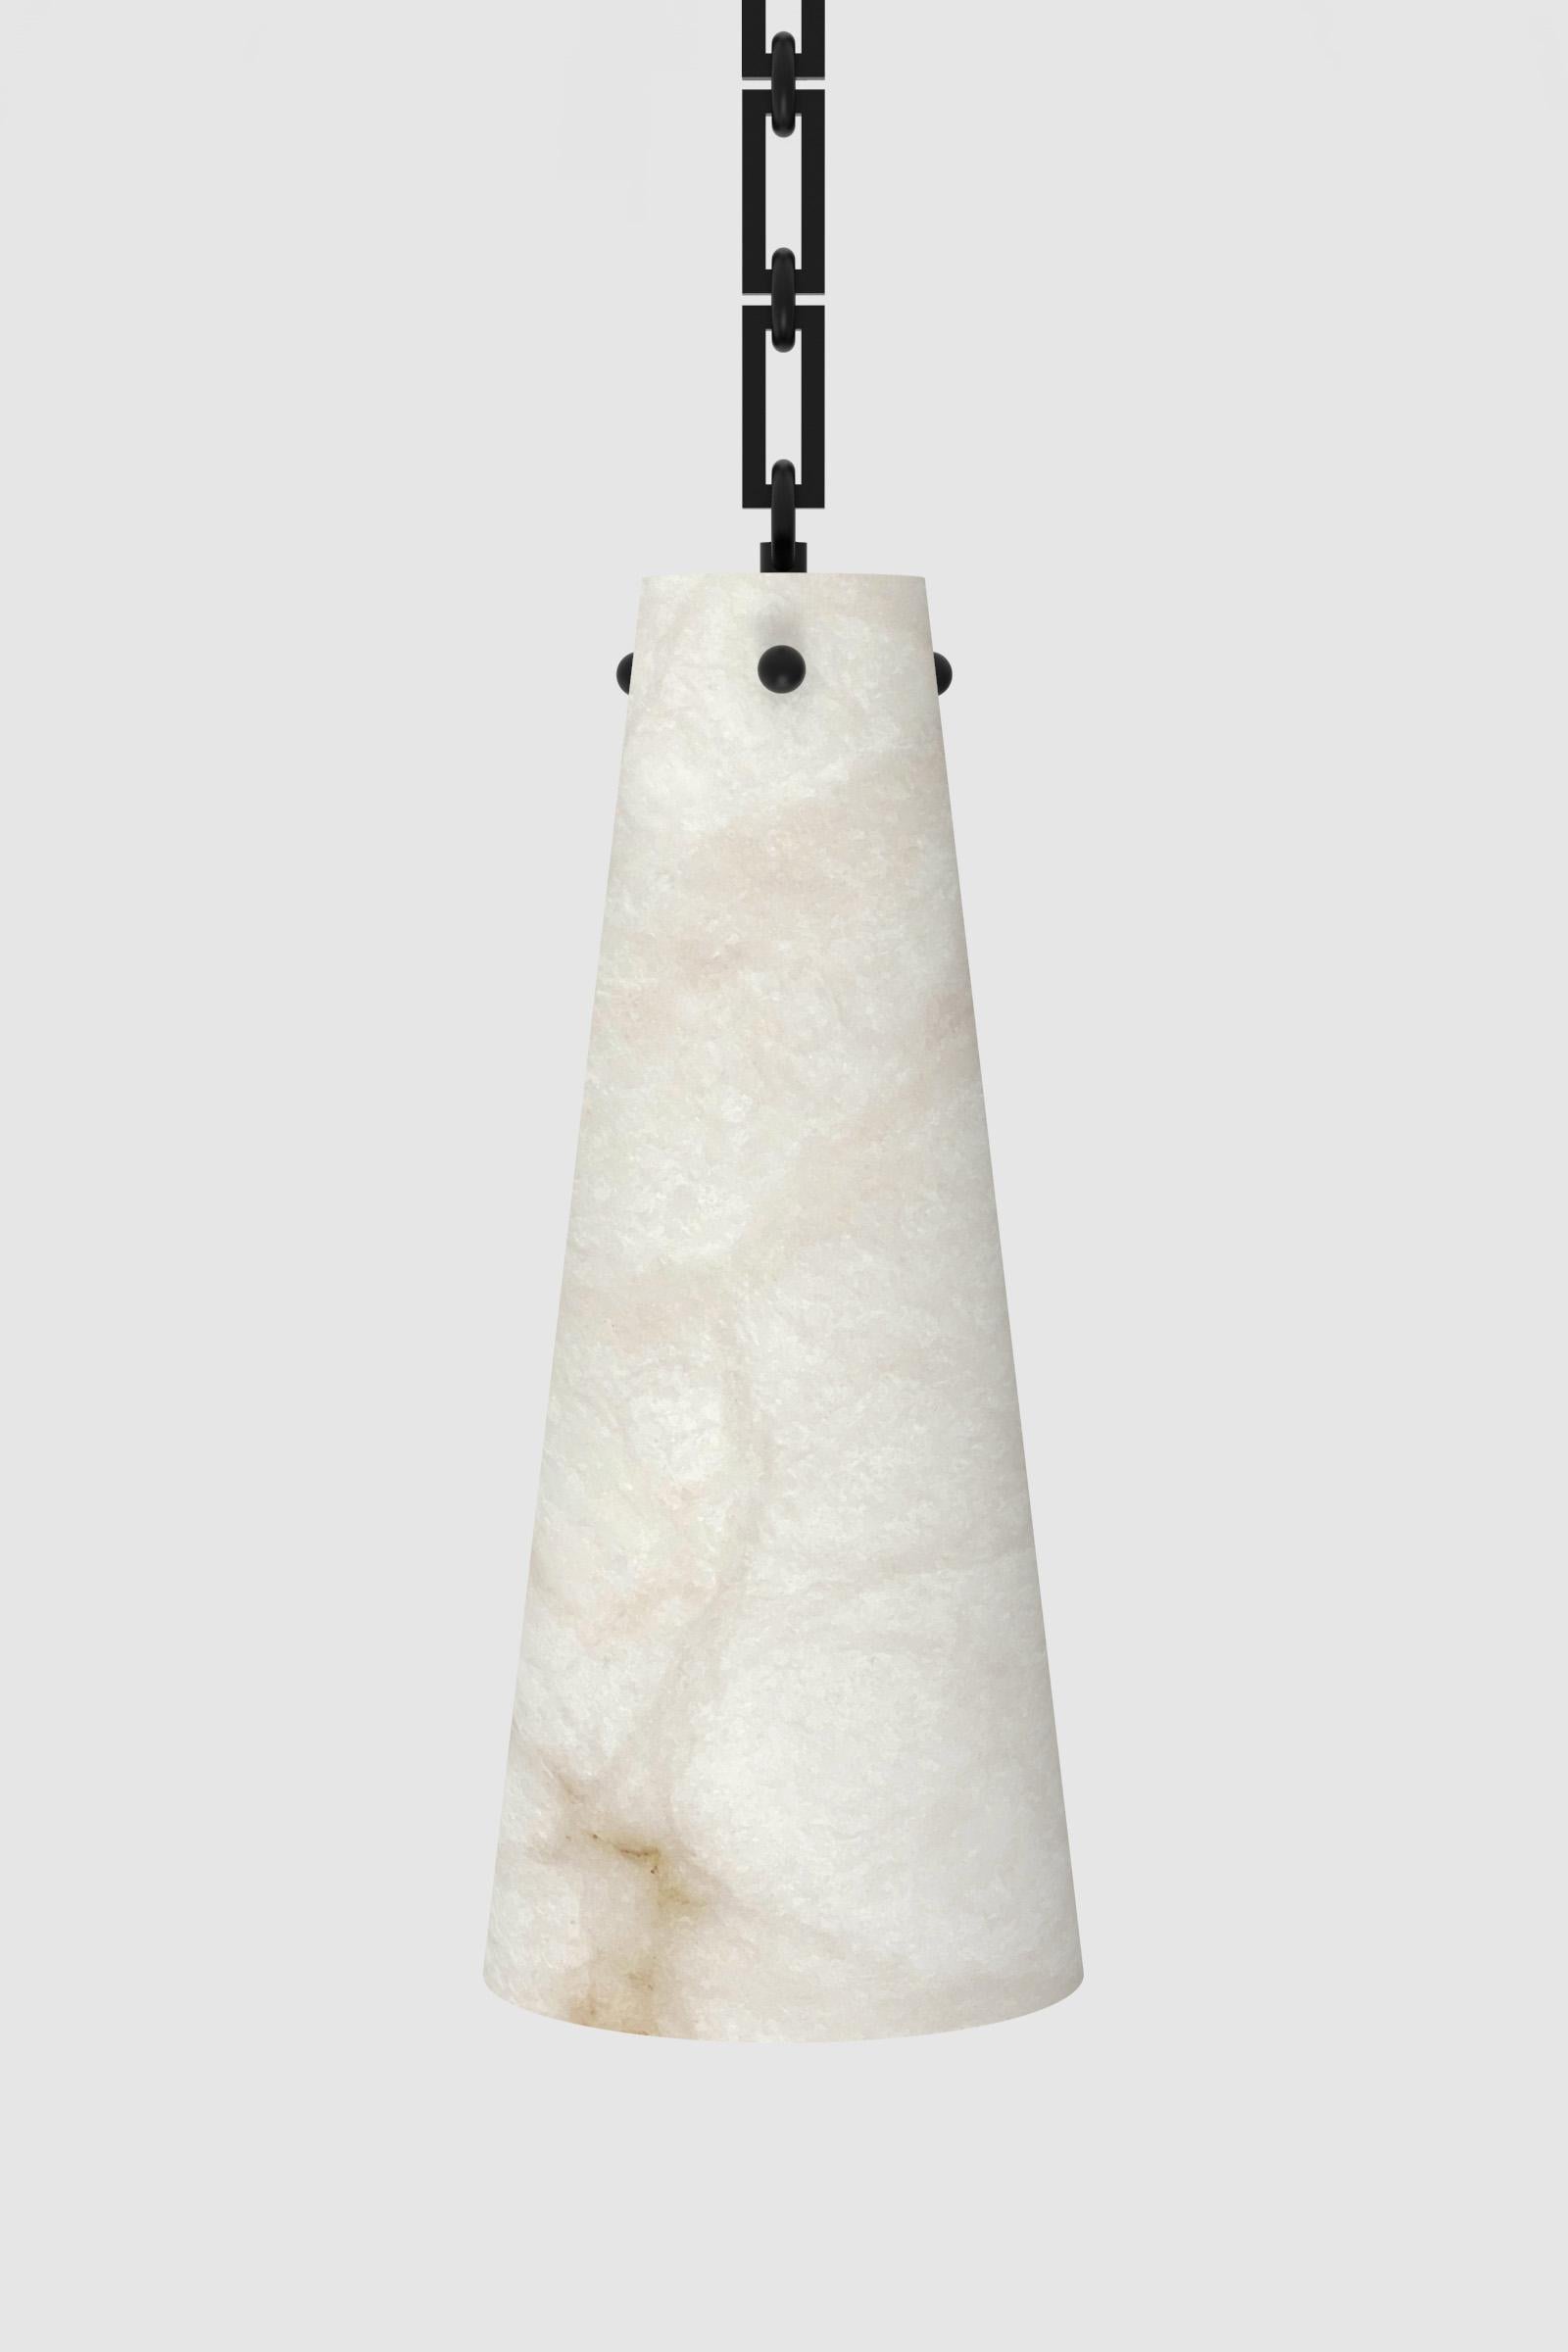 Italian Contemporary Lucca Pendant 202A-1S in Alabaster by Orphan Work, 2021 For Sale